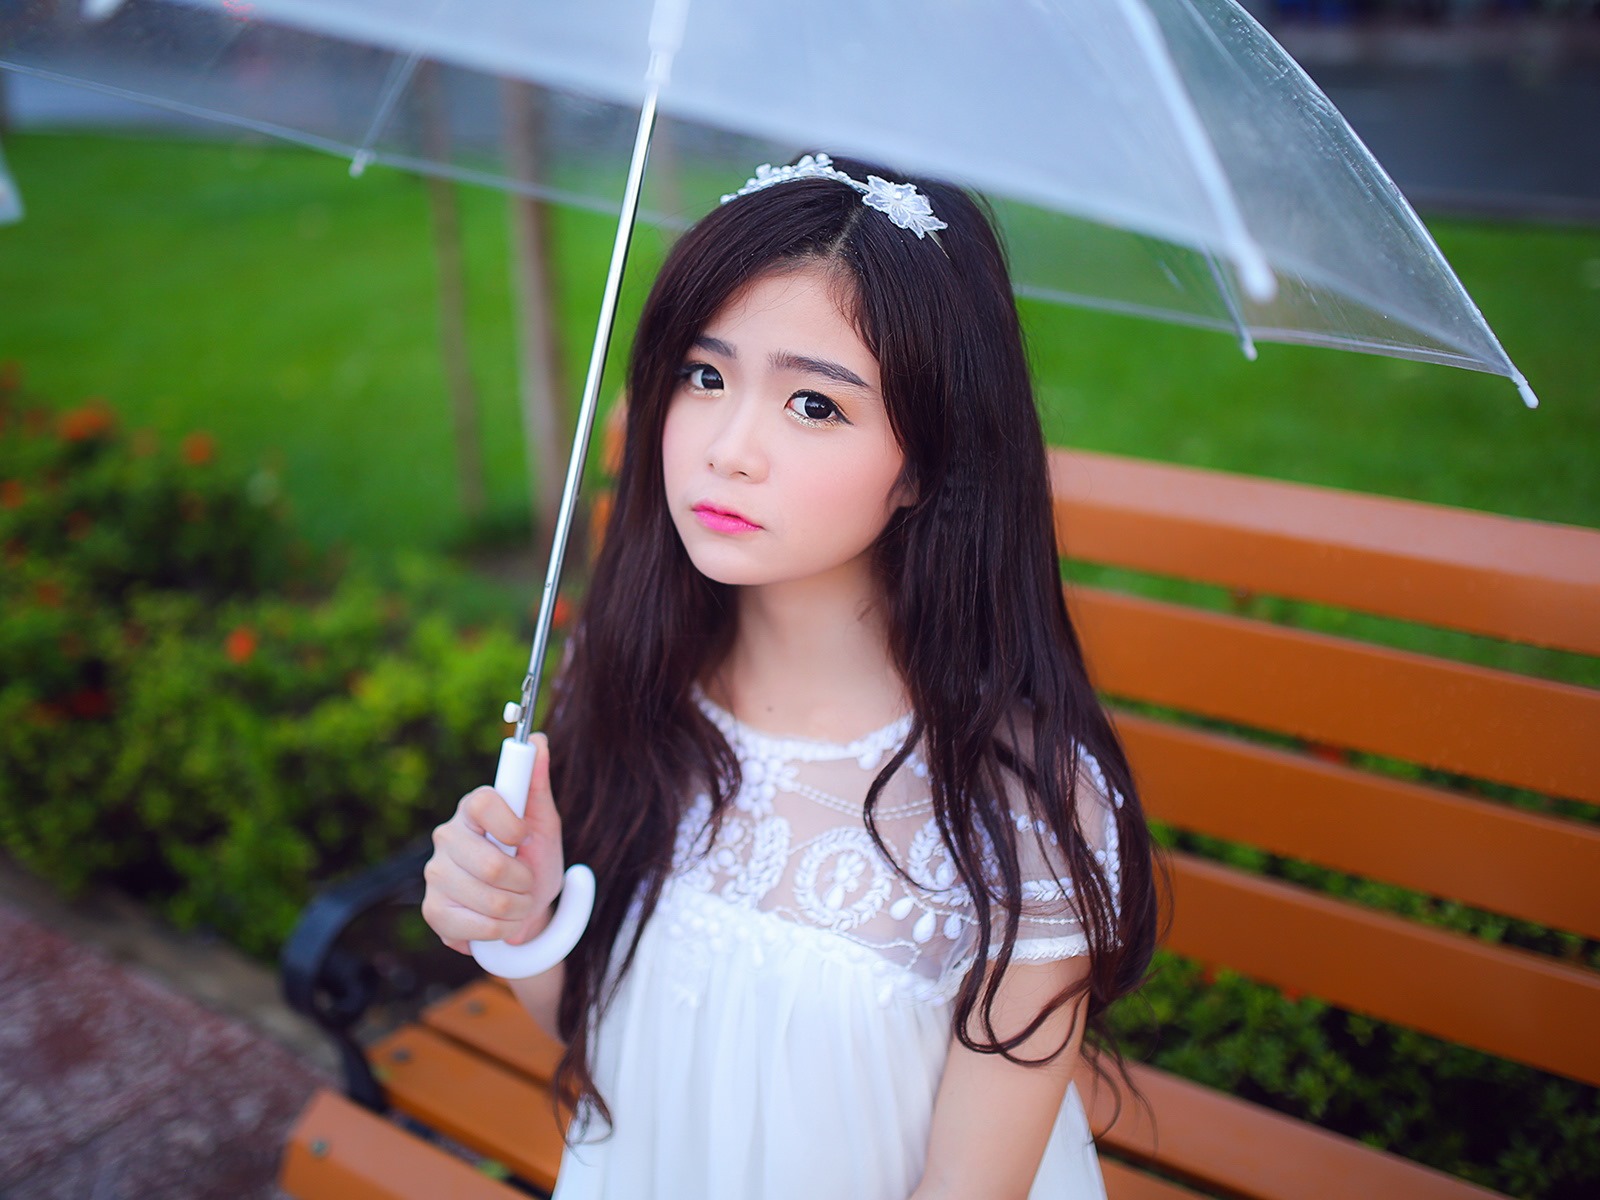 Pure and lovely young Asian girl HD wallpapers collection (3) #20 - 1600x1200